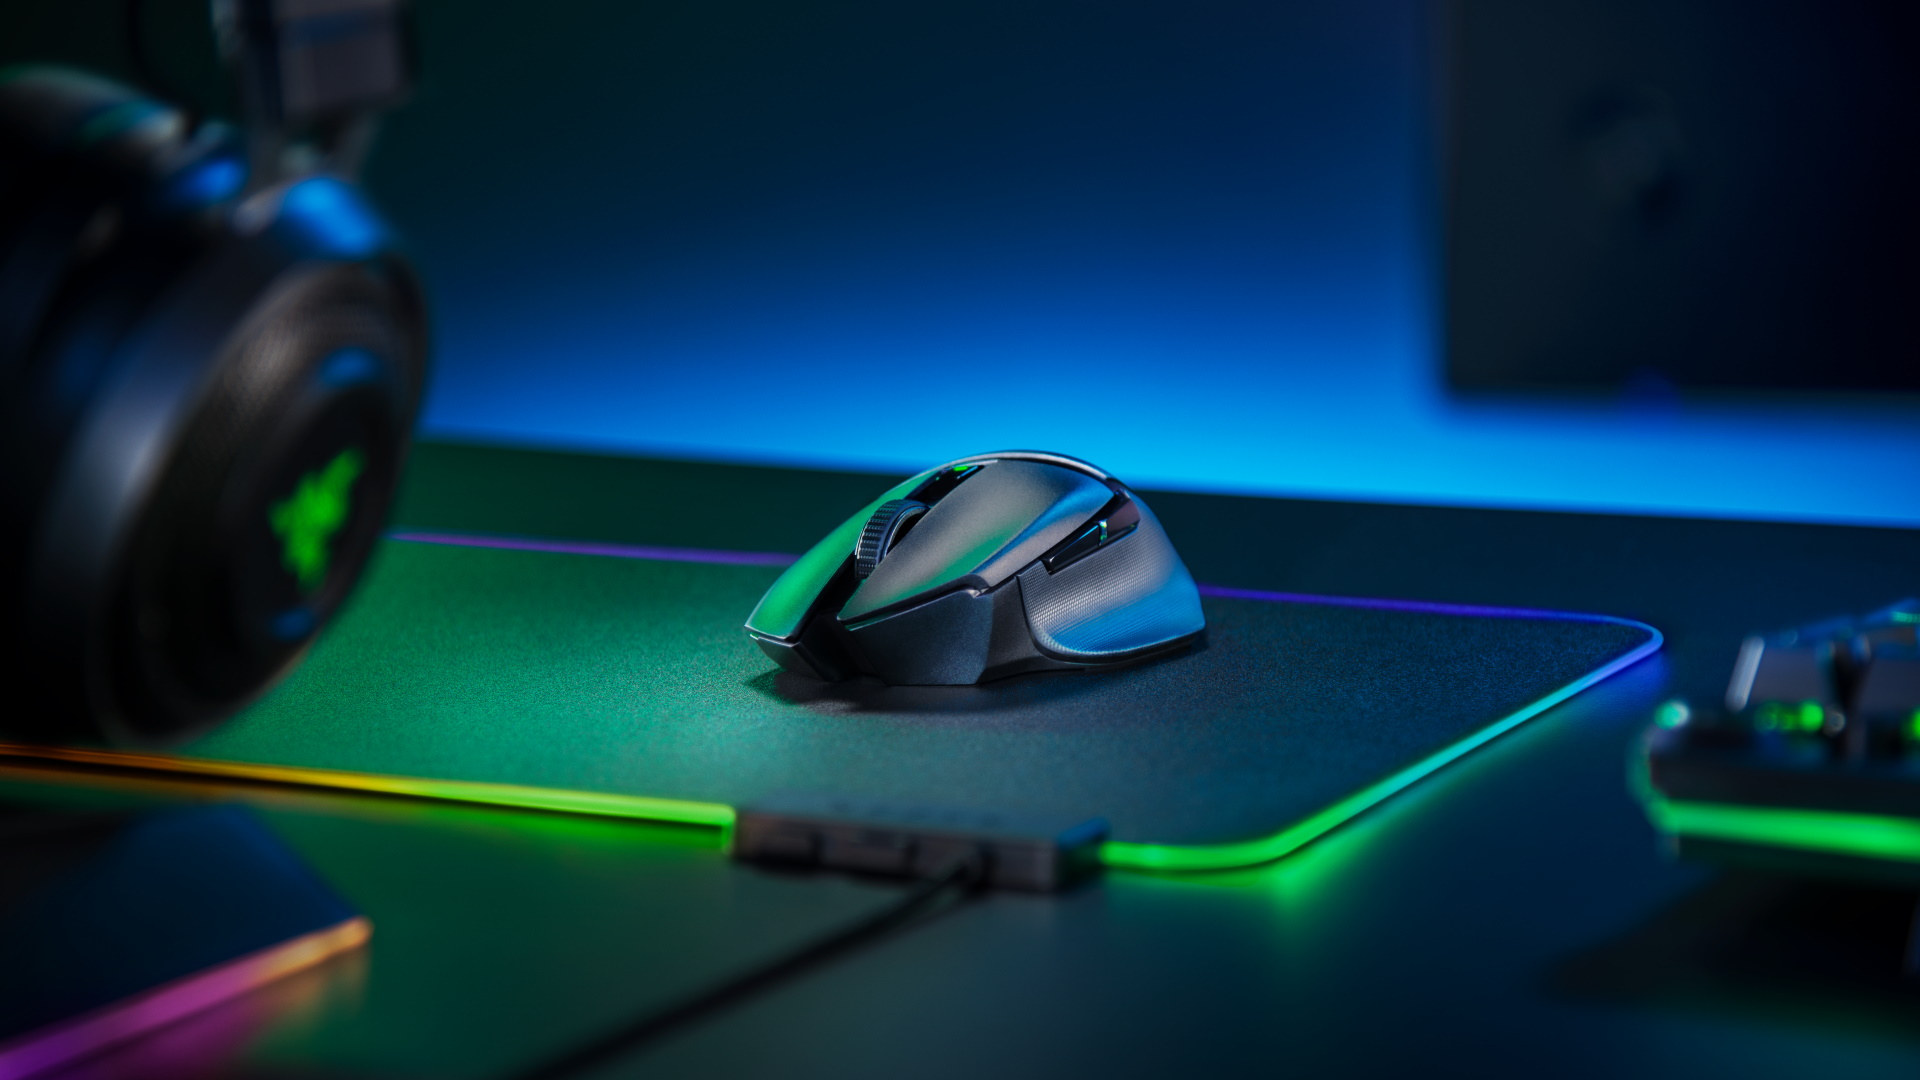 Best wireless gaming mouse in 2021